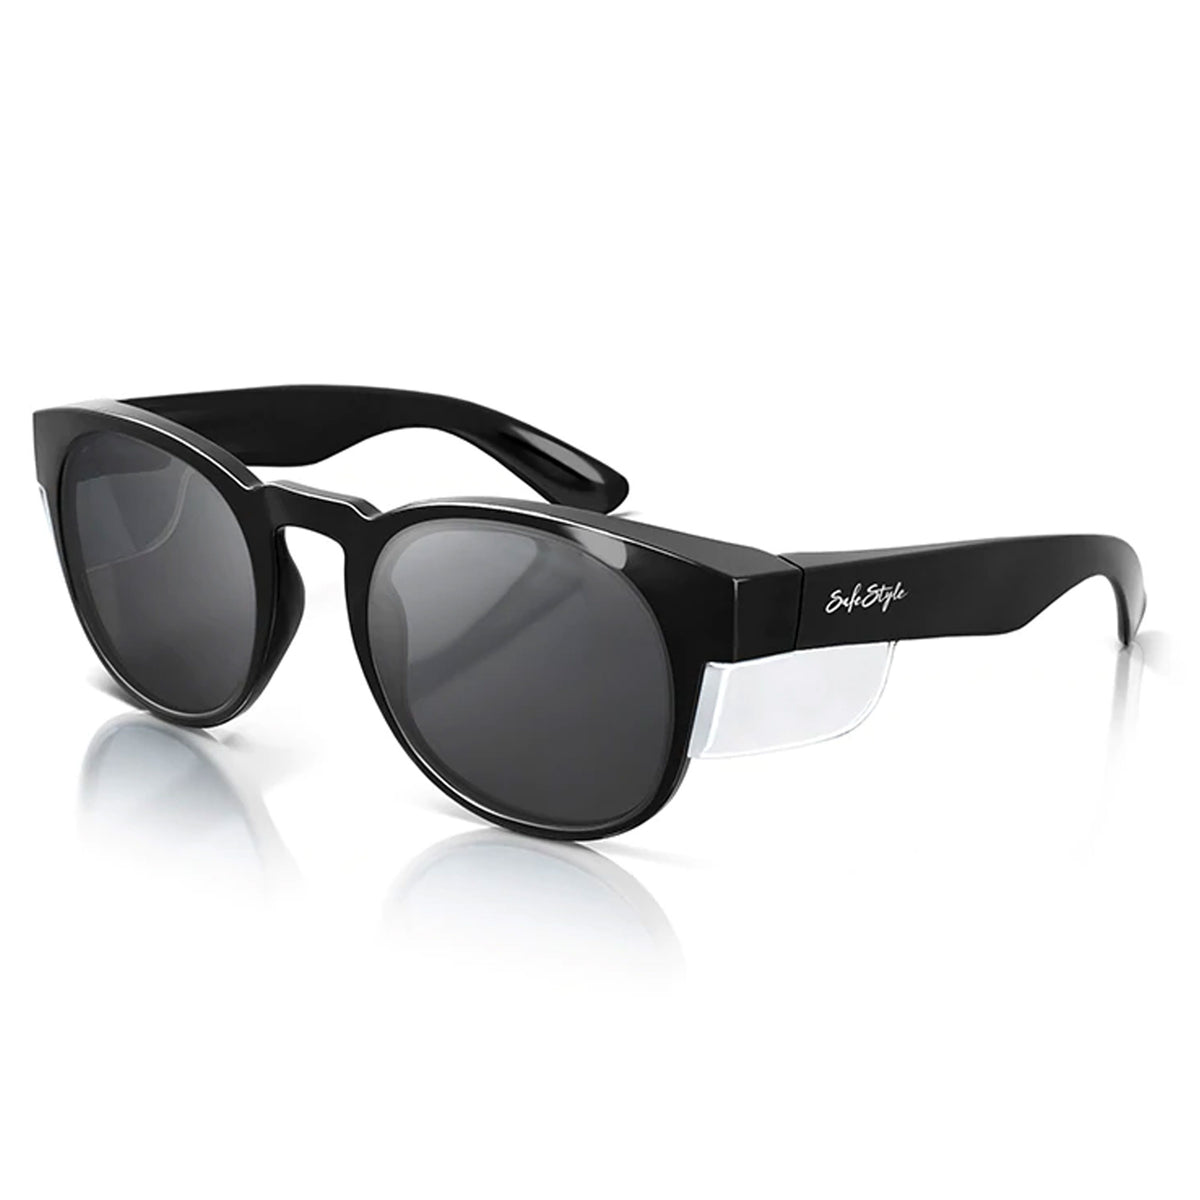 safestyle cruisers black frame with tinted uv400 lens